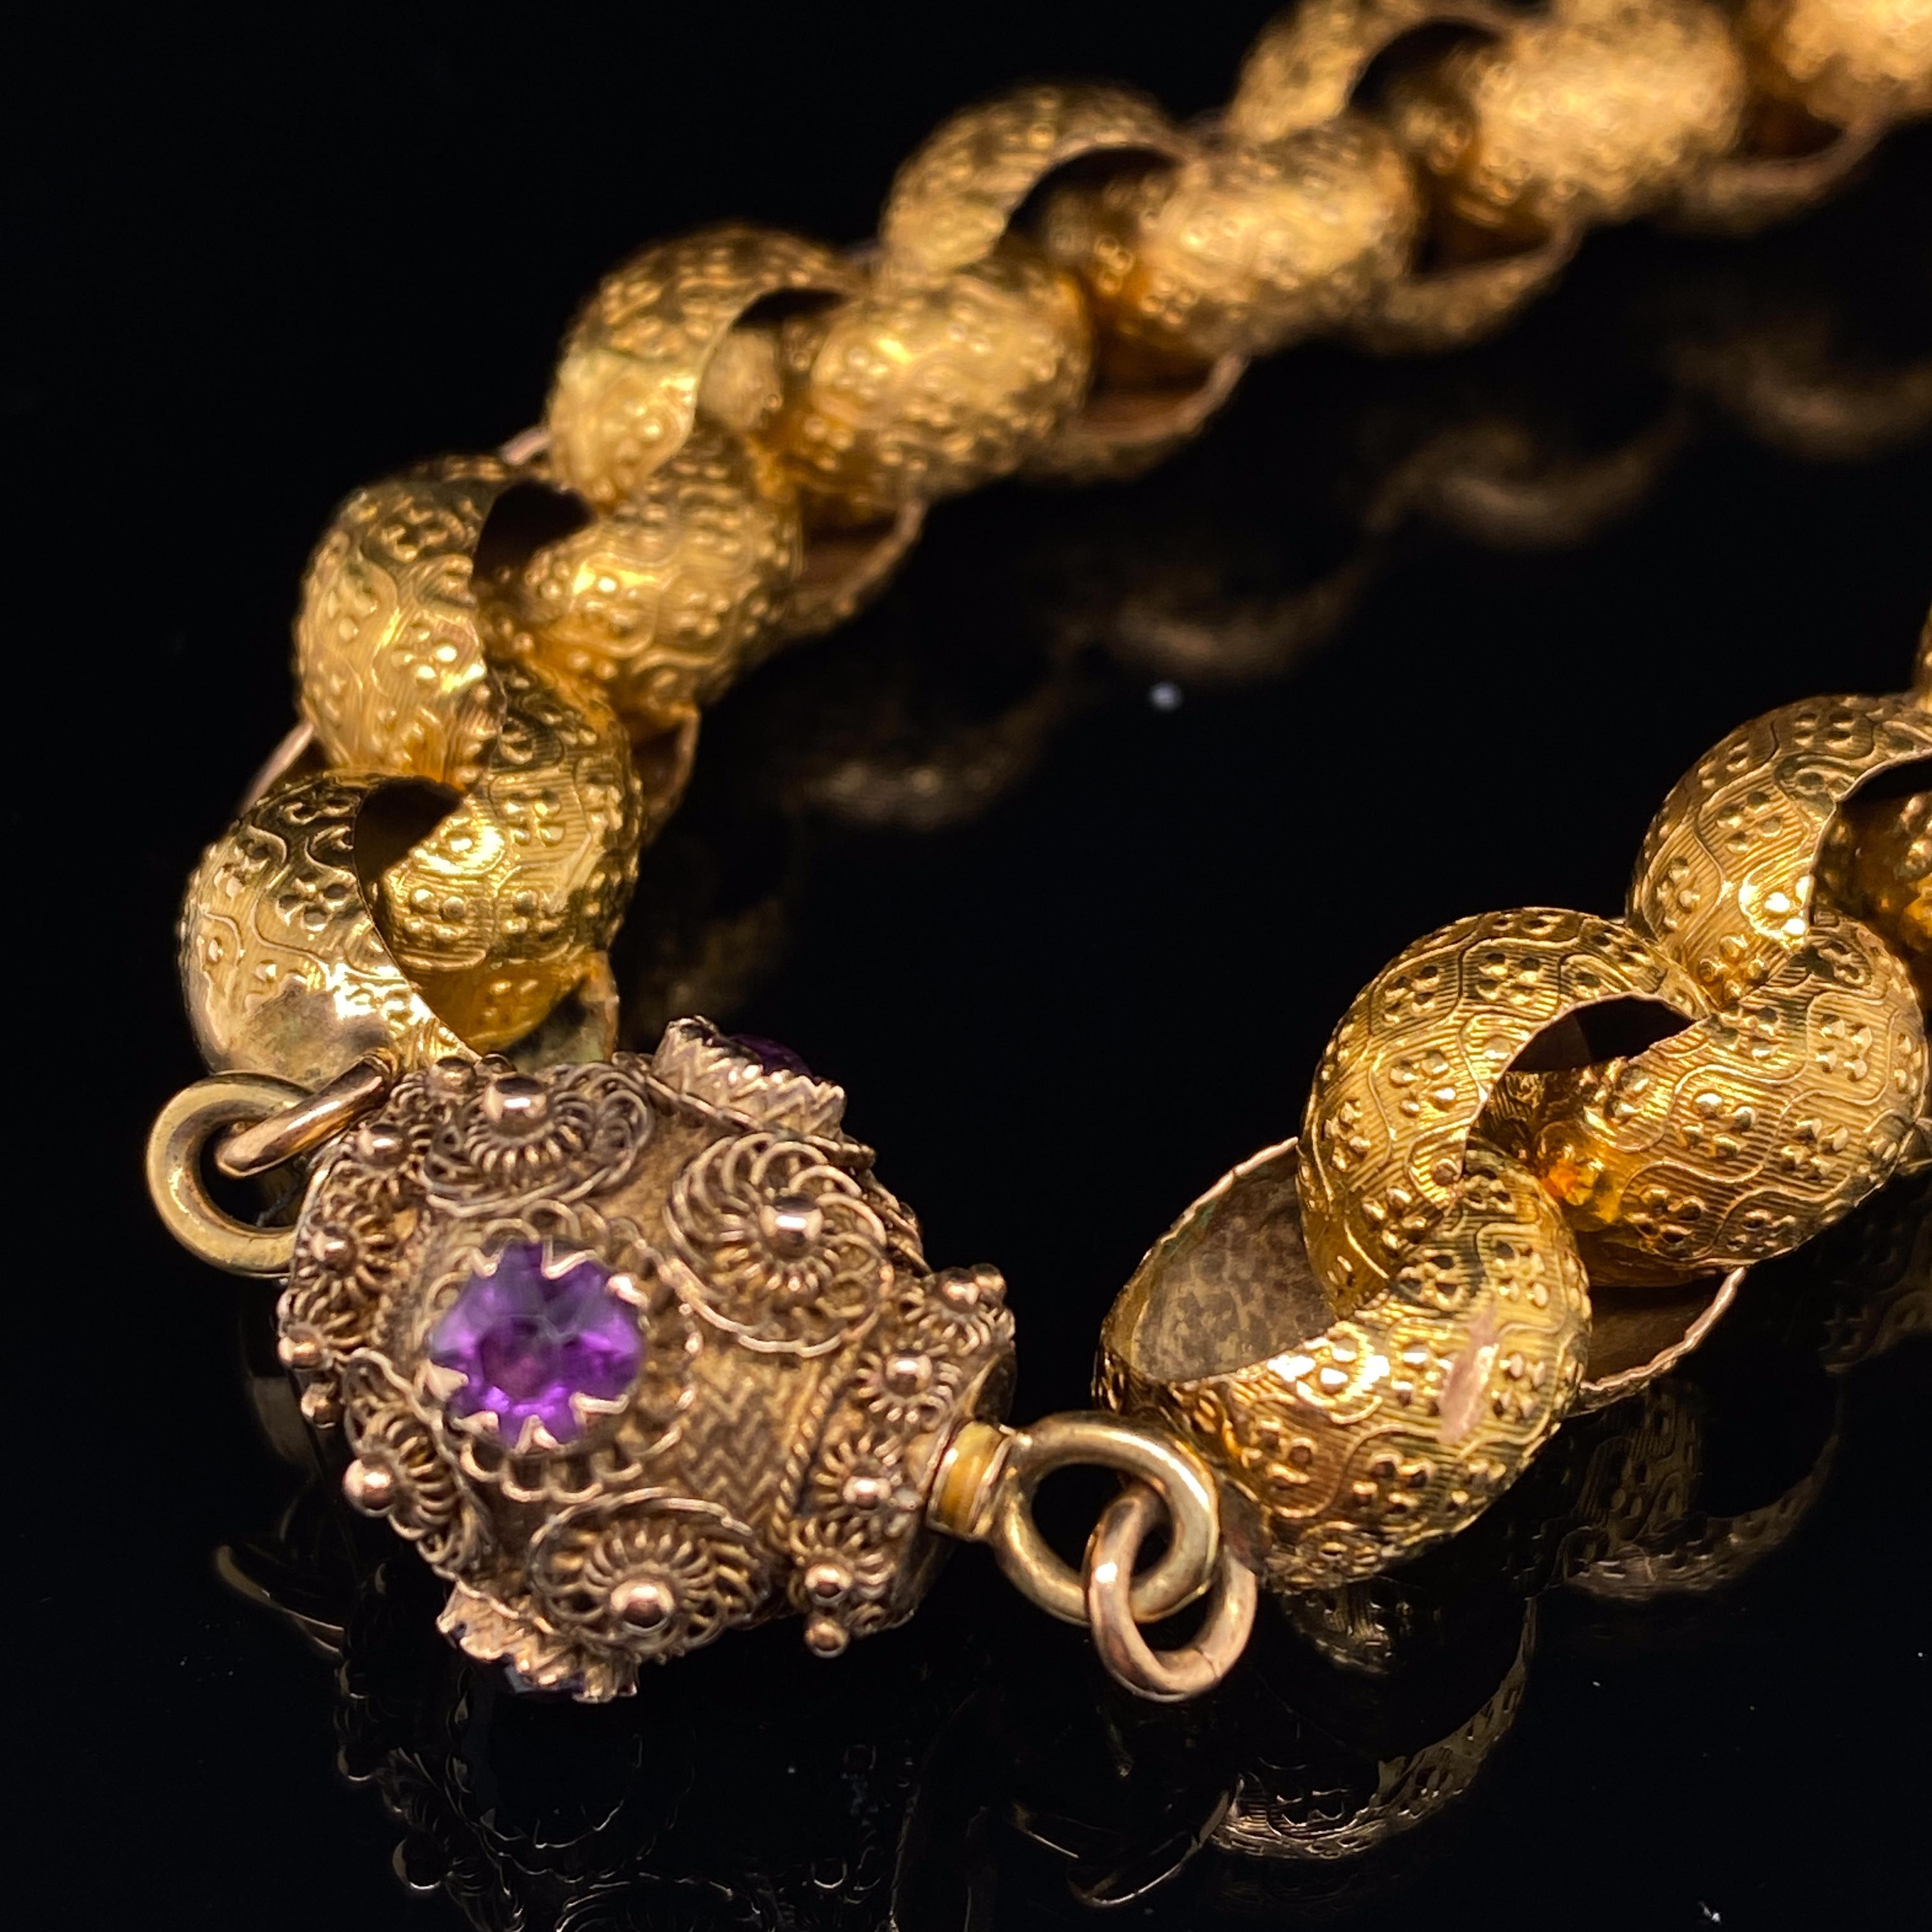 A Georgian 18 karat gold chain amethyst set clasp, circa 1790.

A beautiful example of this elegant and wearable Georgian gold work.

Comprised of circular links each with the fine bead detail of a raised ornate dot and undulating stripe pattern